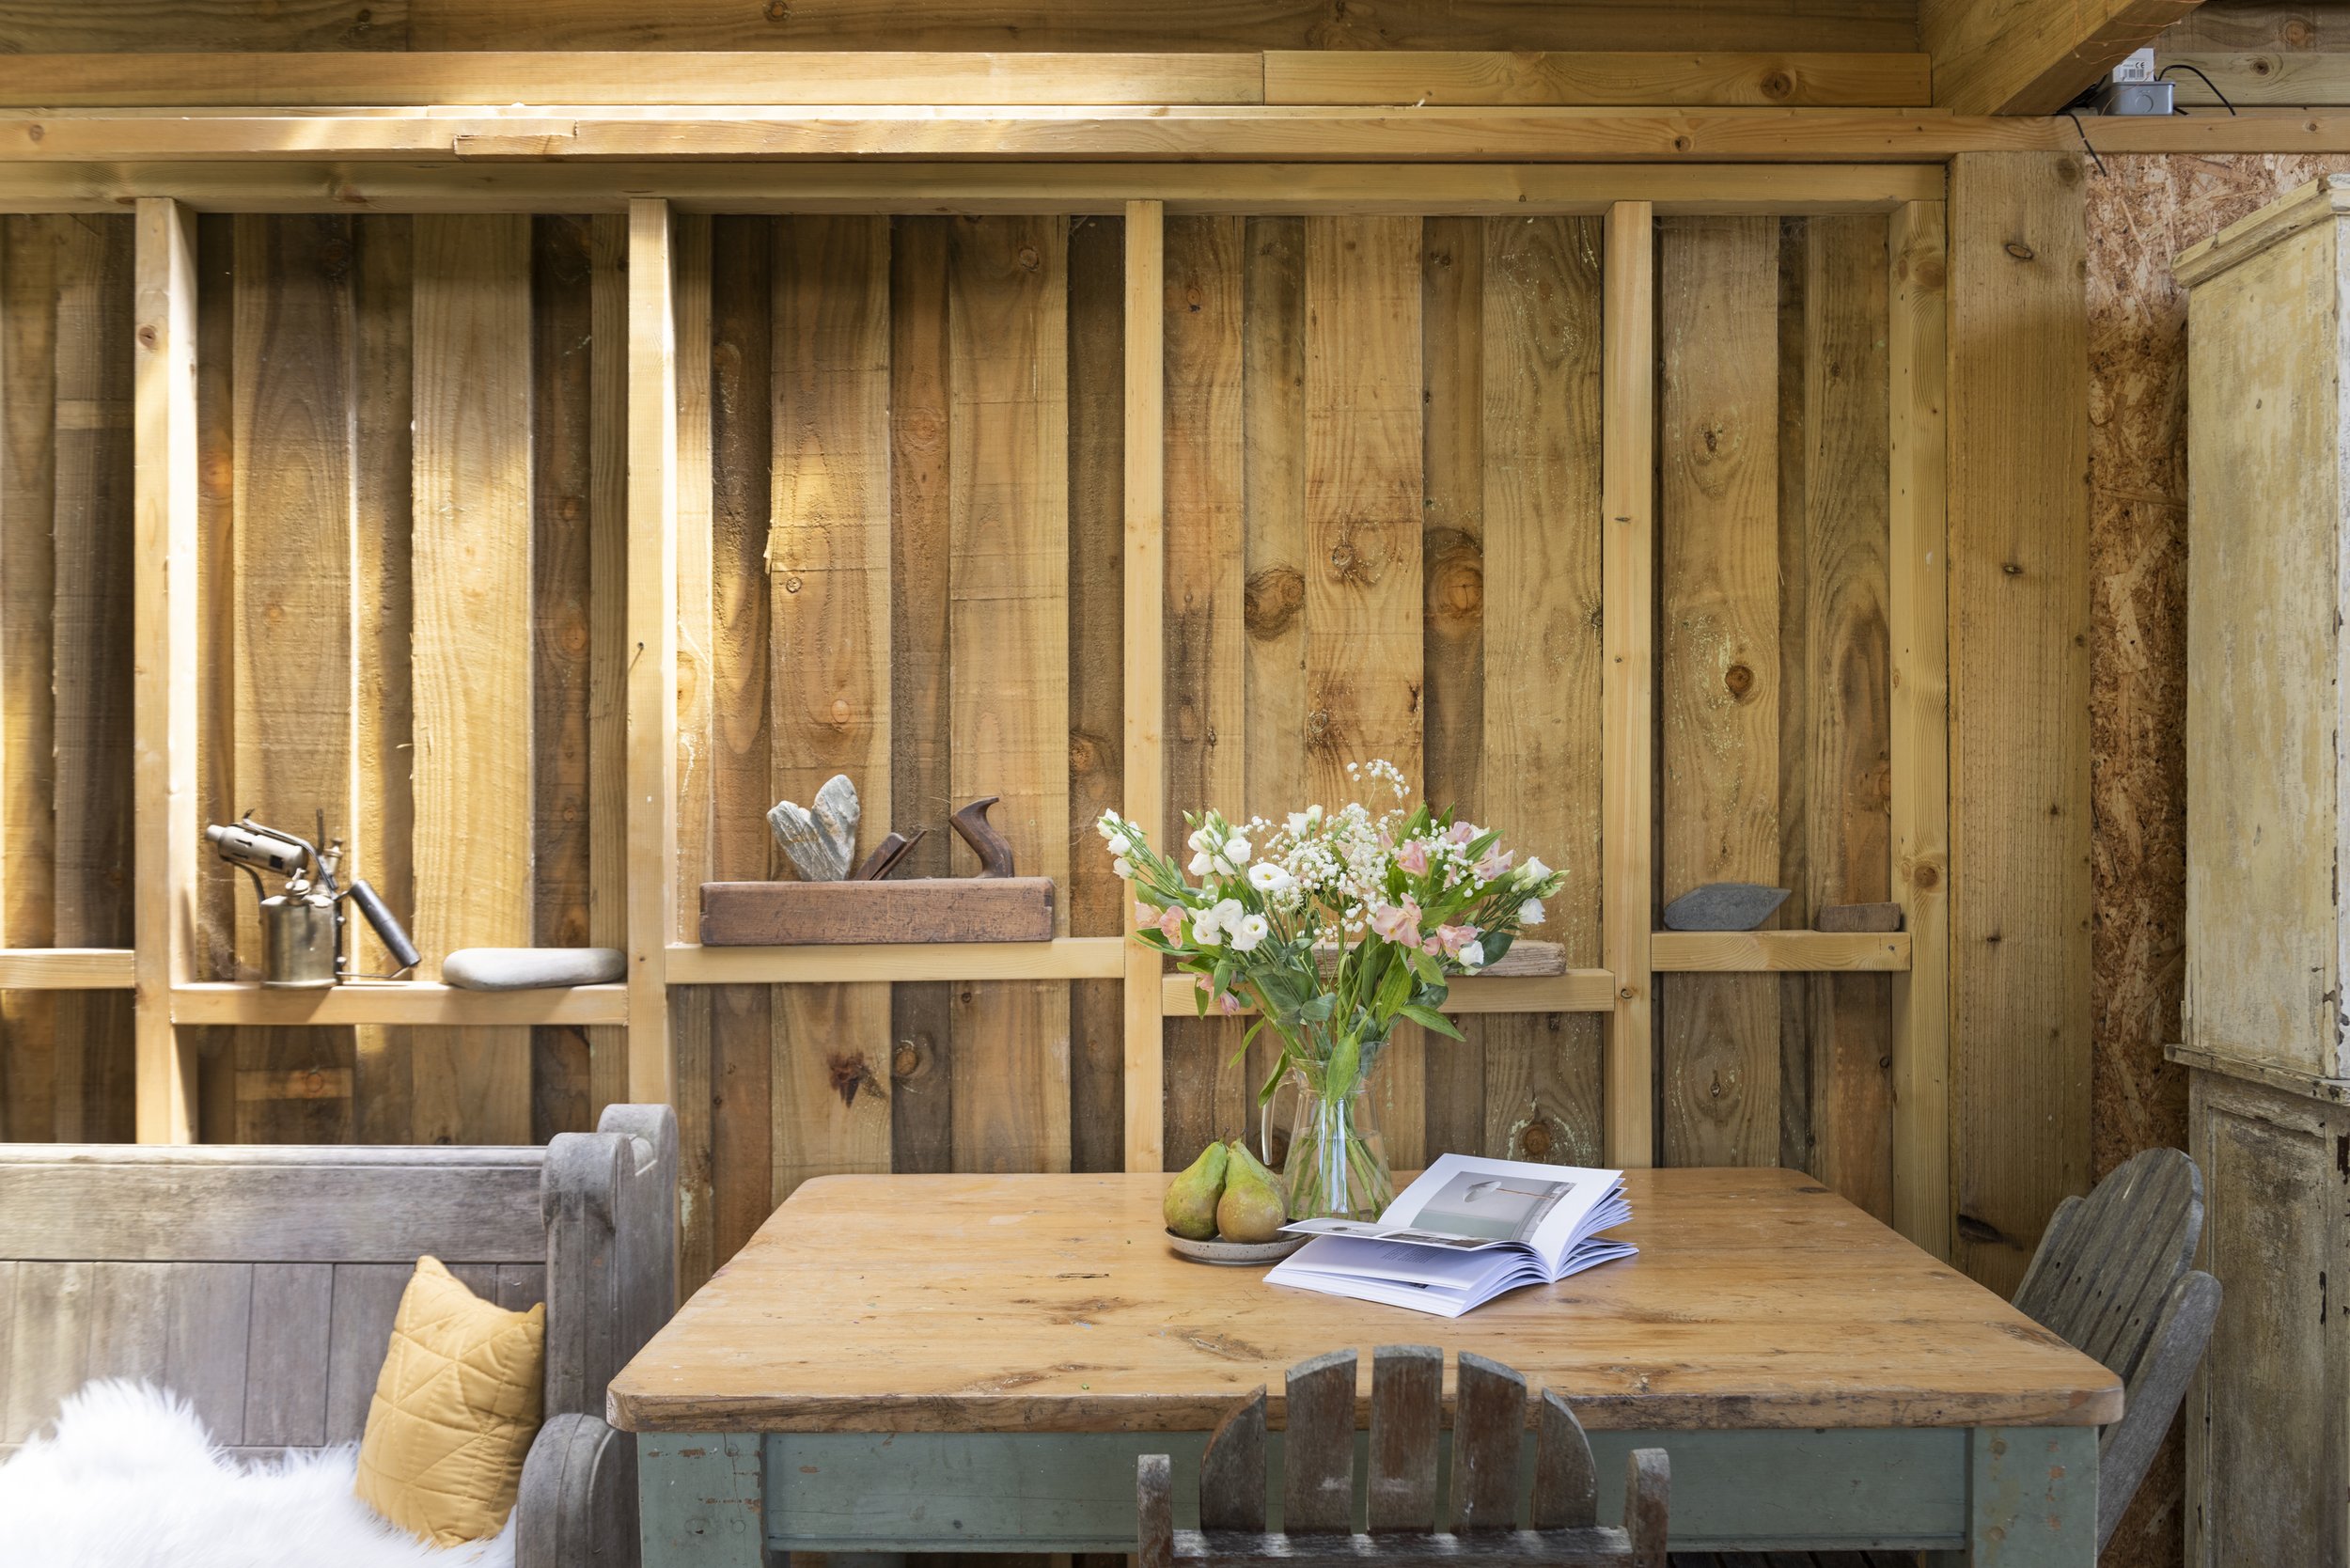 interior of a wooden clad cabin with kitchen table